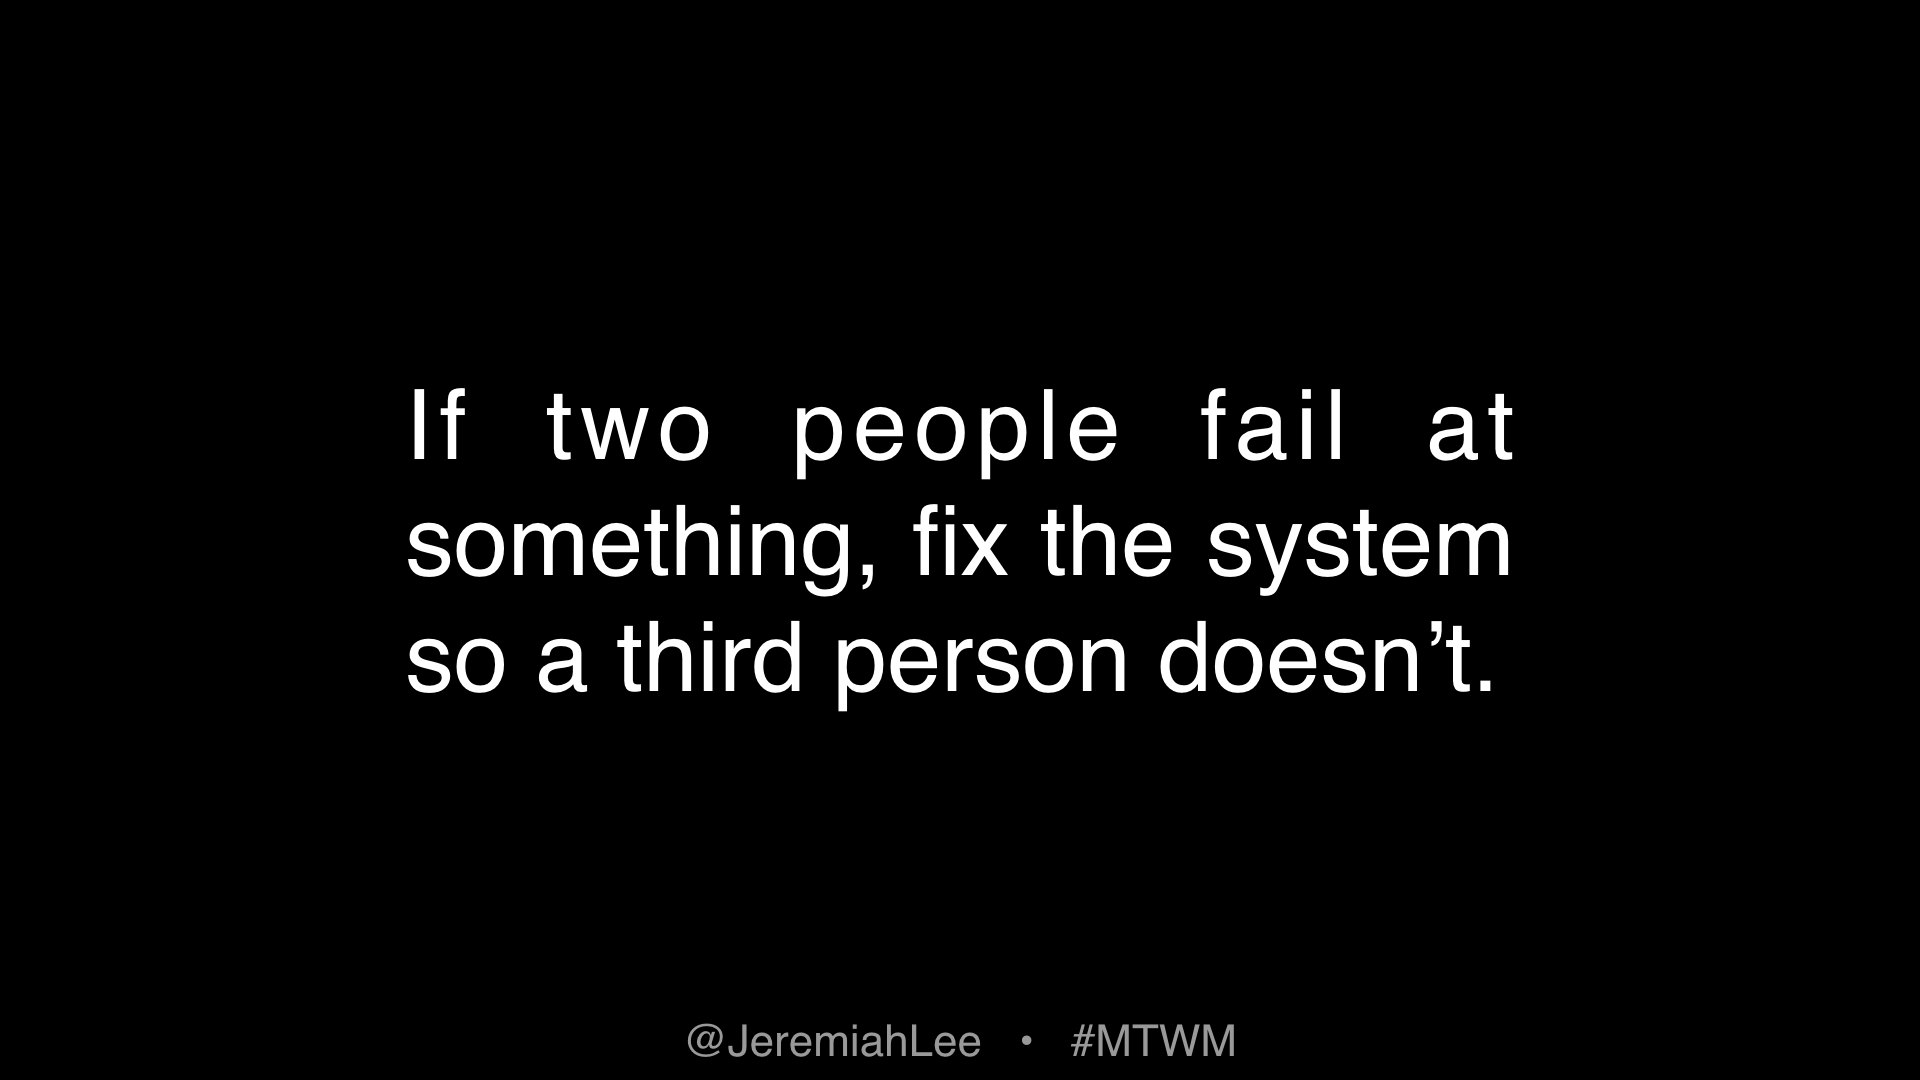 Text: If two people fail at something, fix the system so a third person doesn’t.